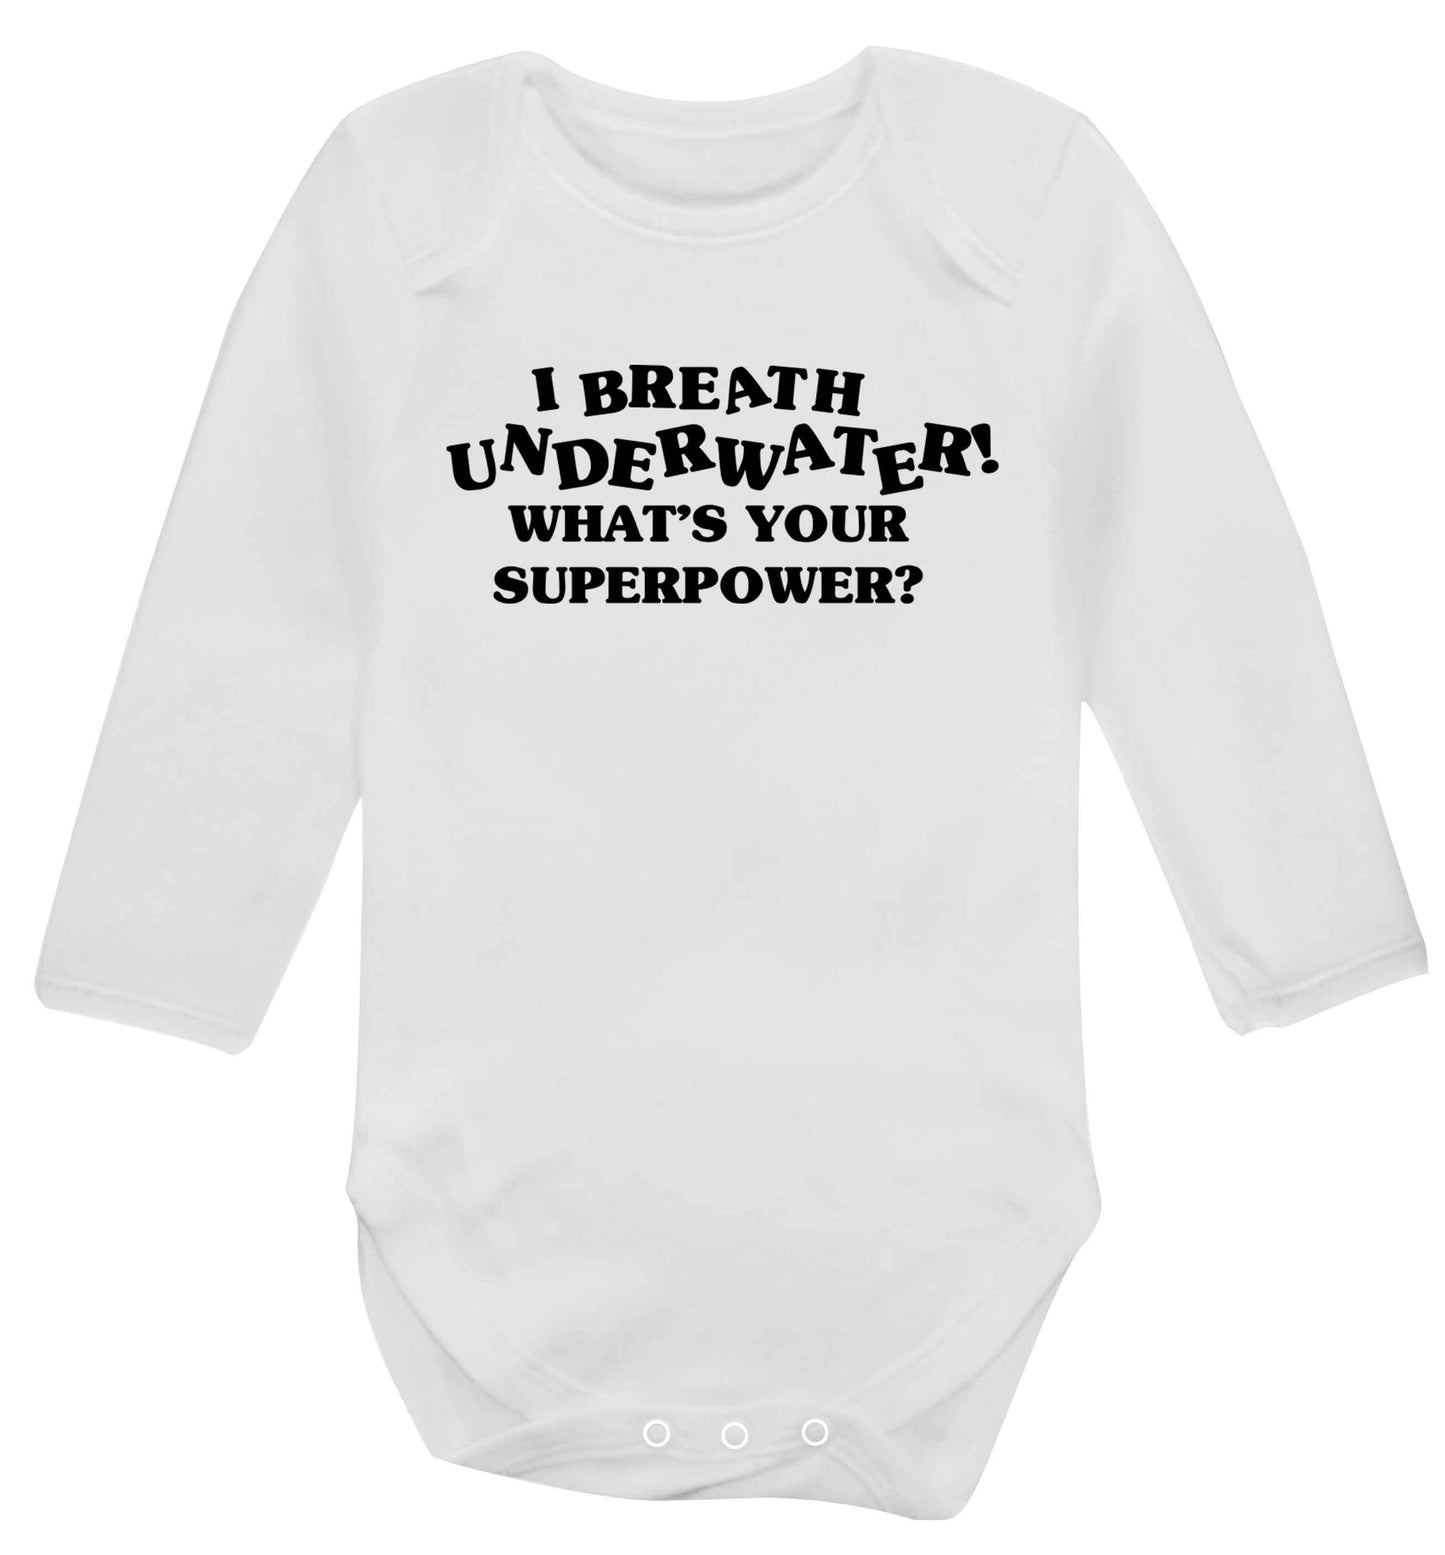 I breath underwater what's your superpower? Baby Vest long sleeved white 6-12 months